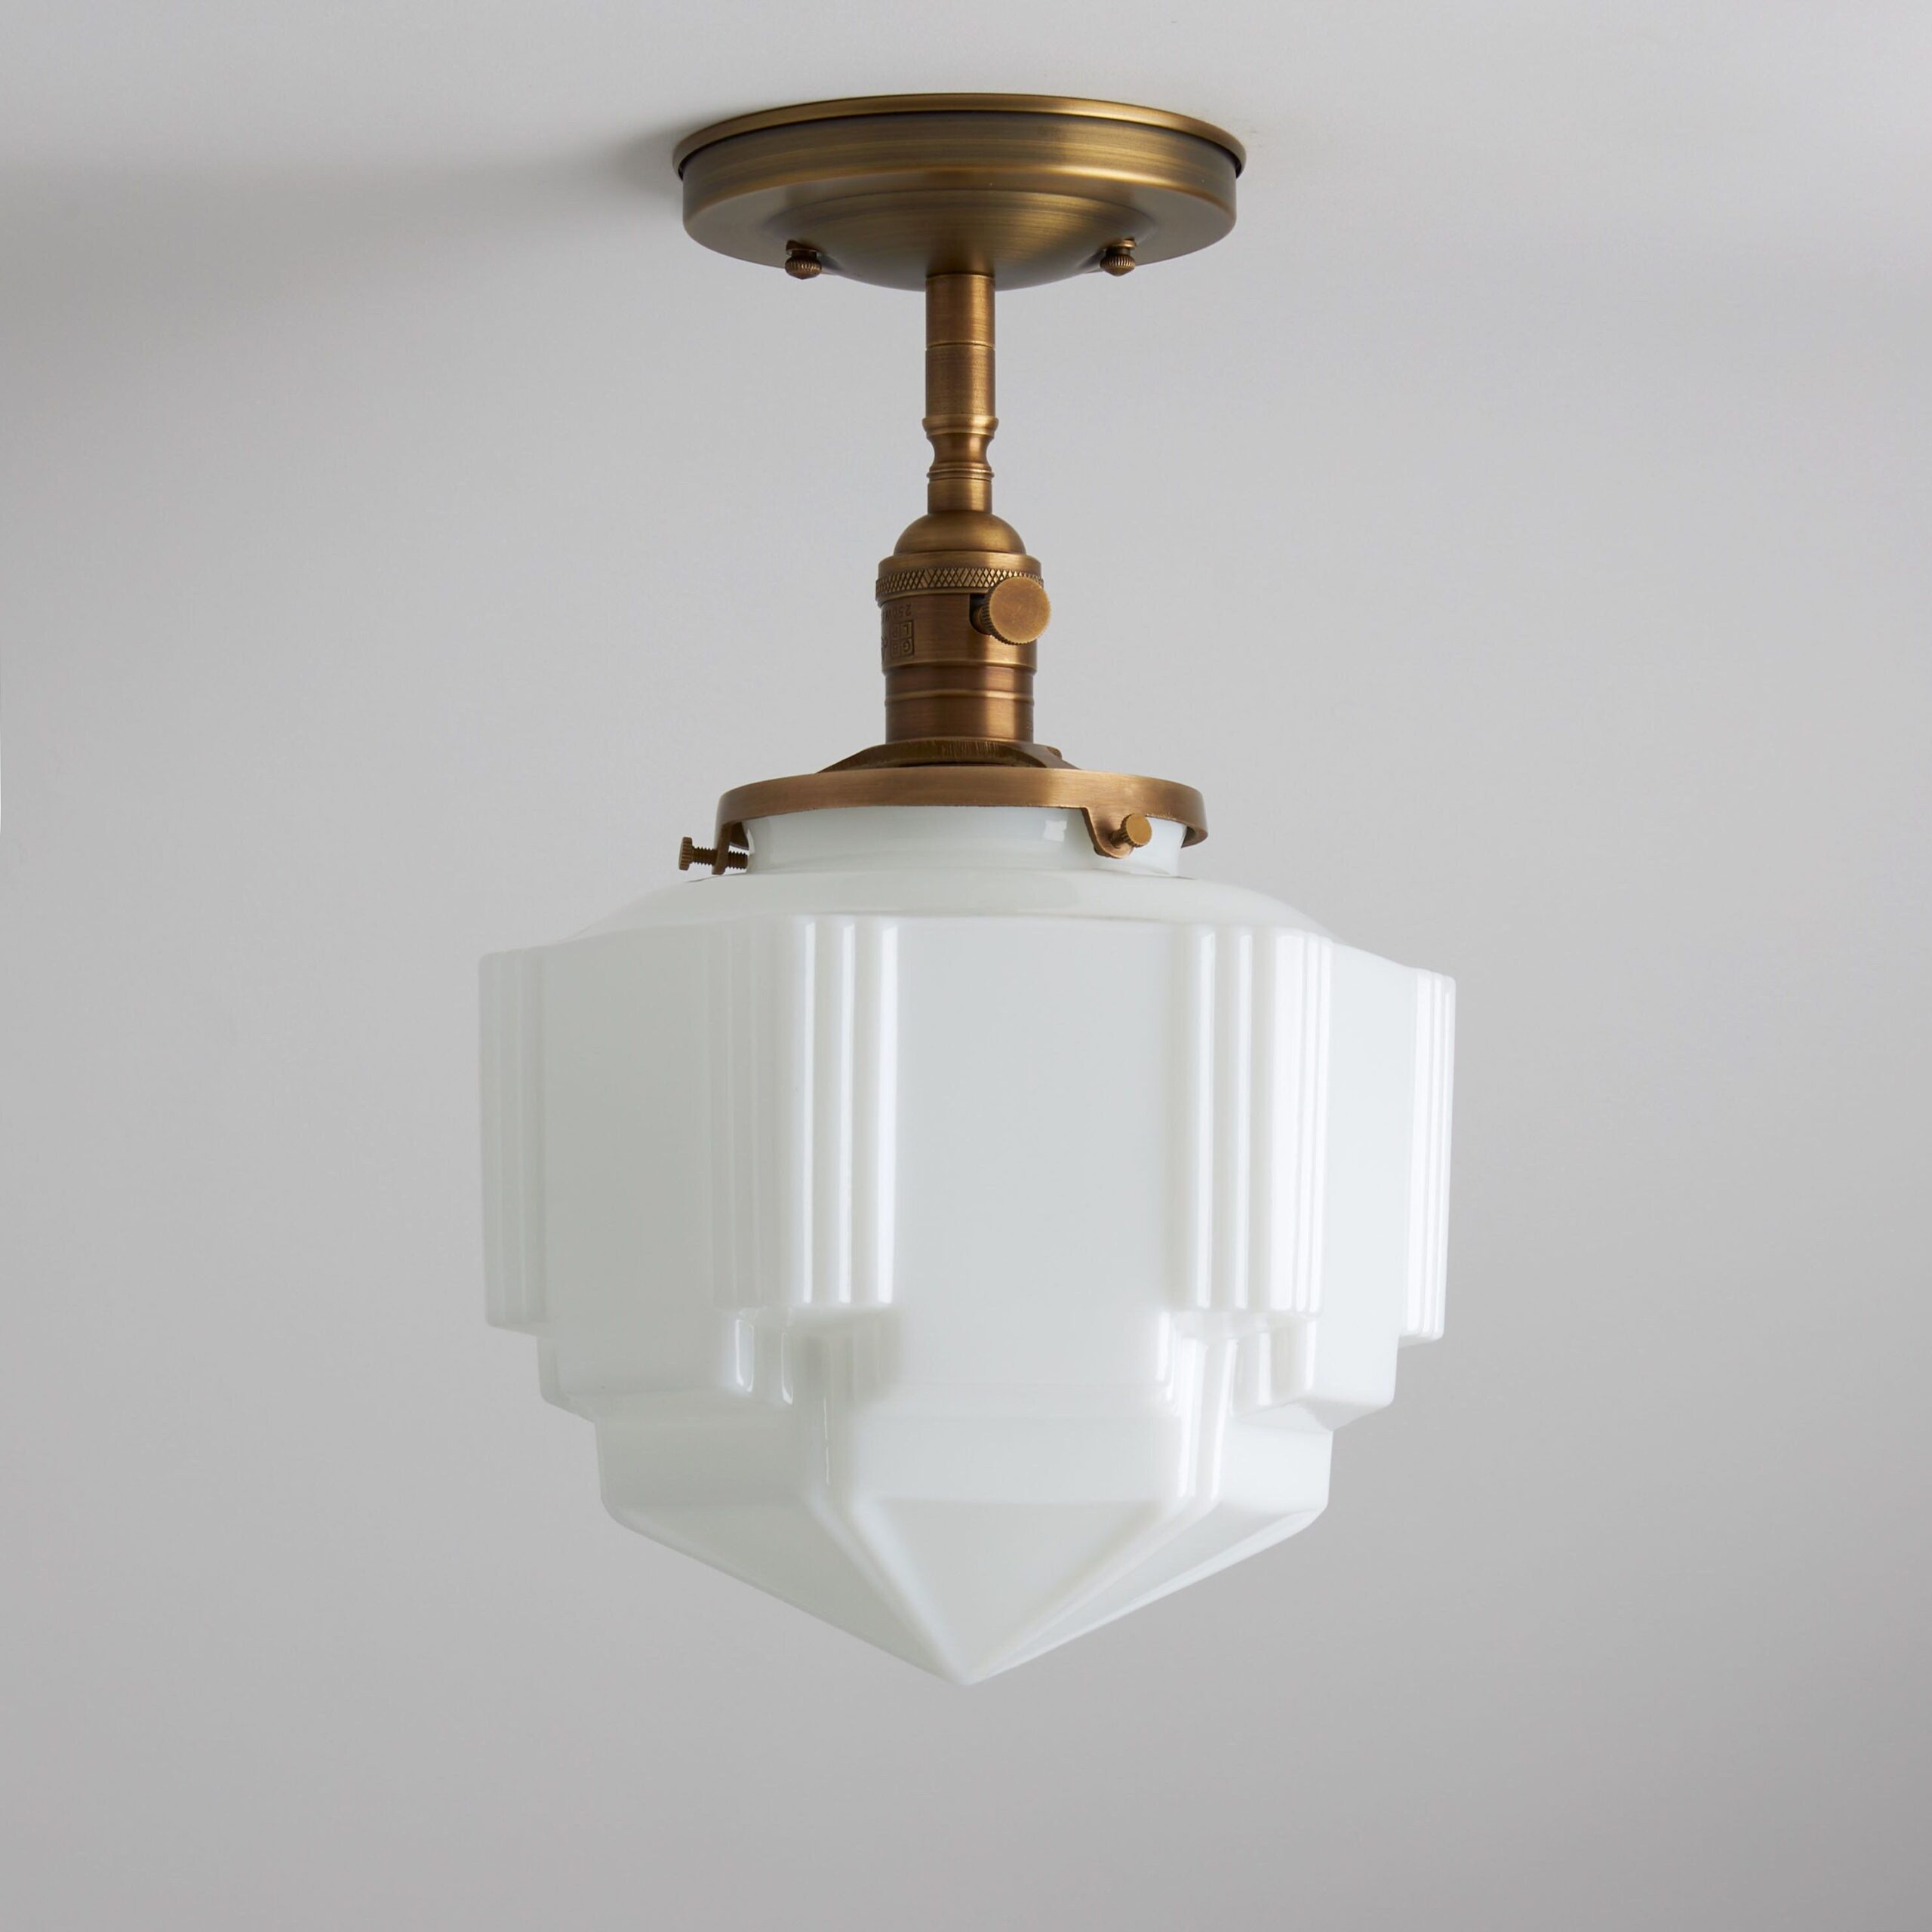 Shine Bright: Choosing the Perfect Bathroom Ceiling Light Fixtures for Your Space